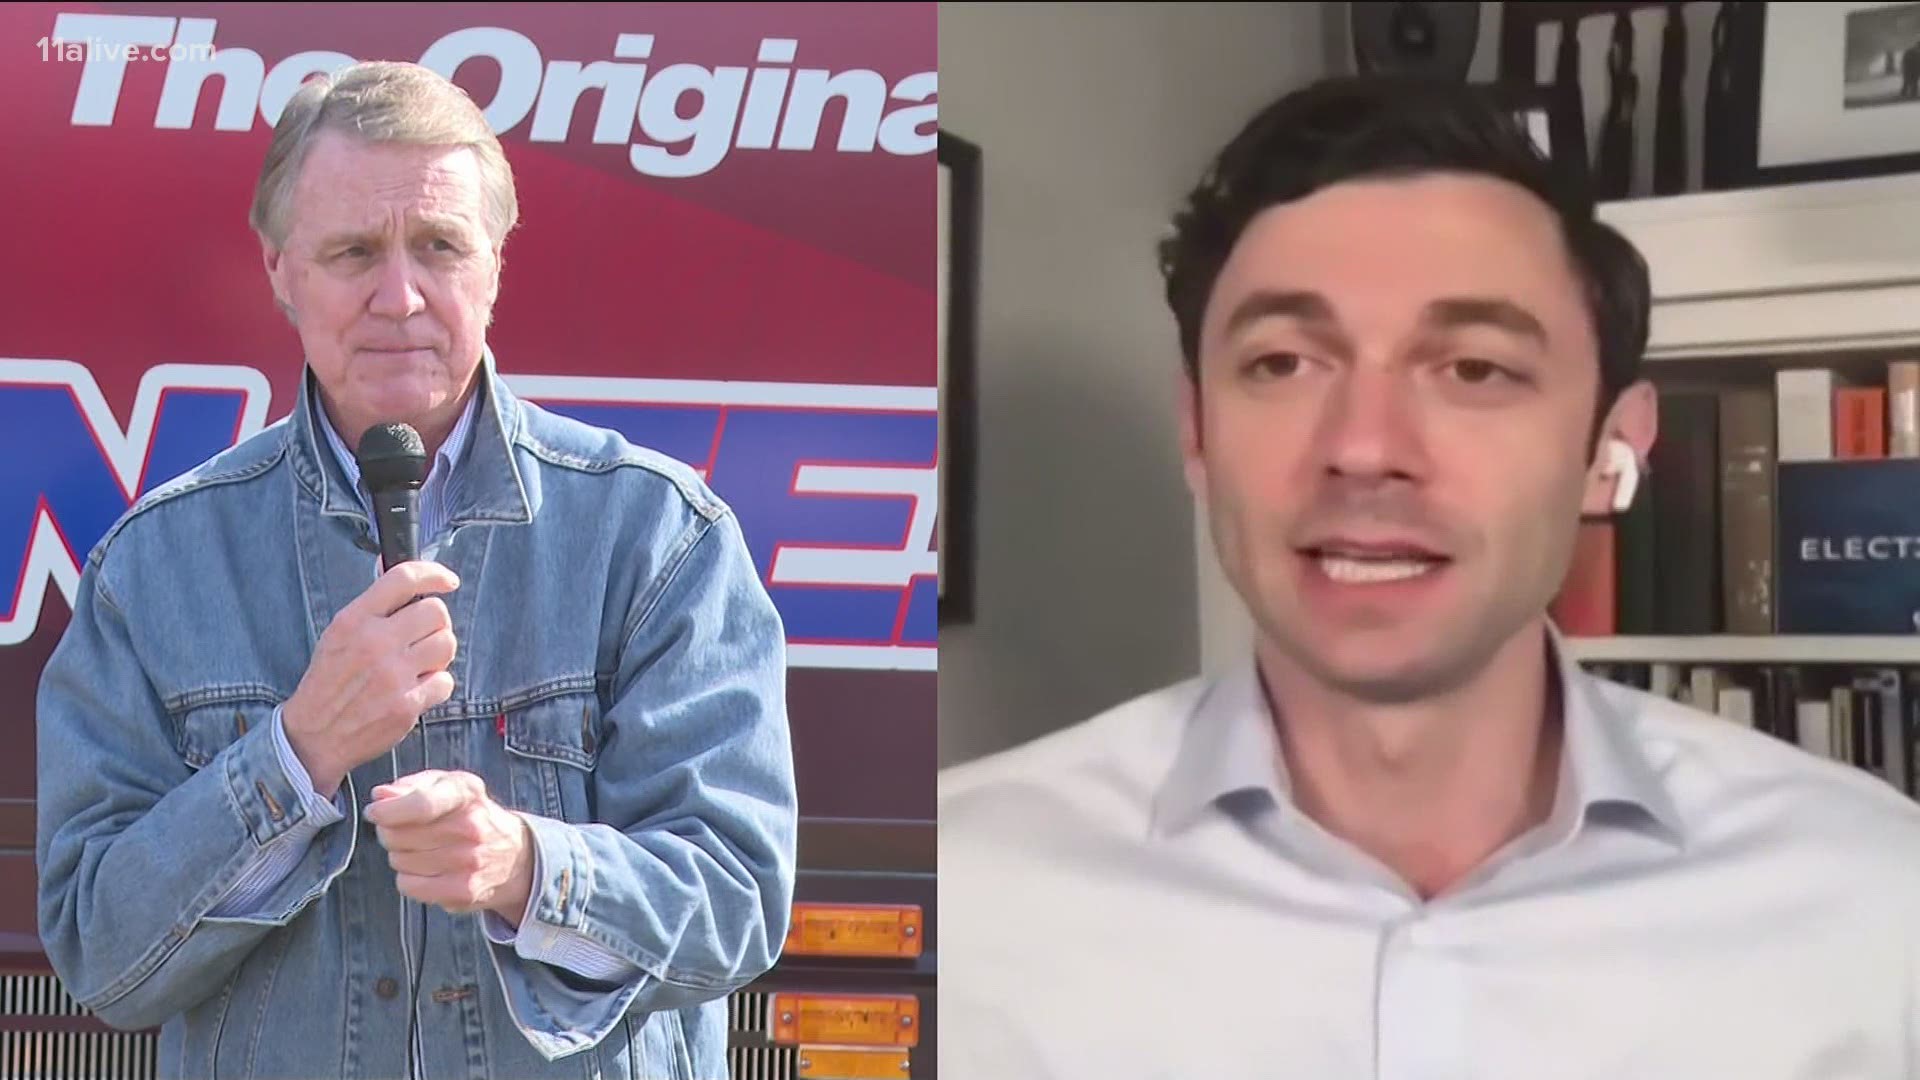 Ossoff and Perdue are taking very different approaches to their campaign in what is expected to be a close race.